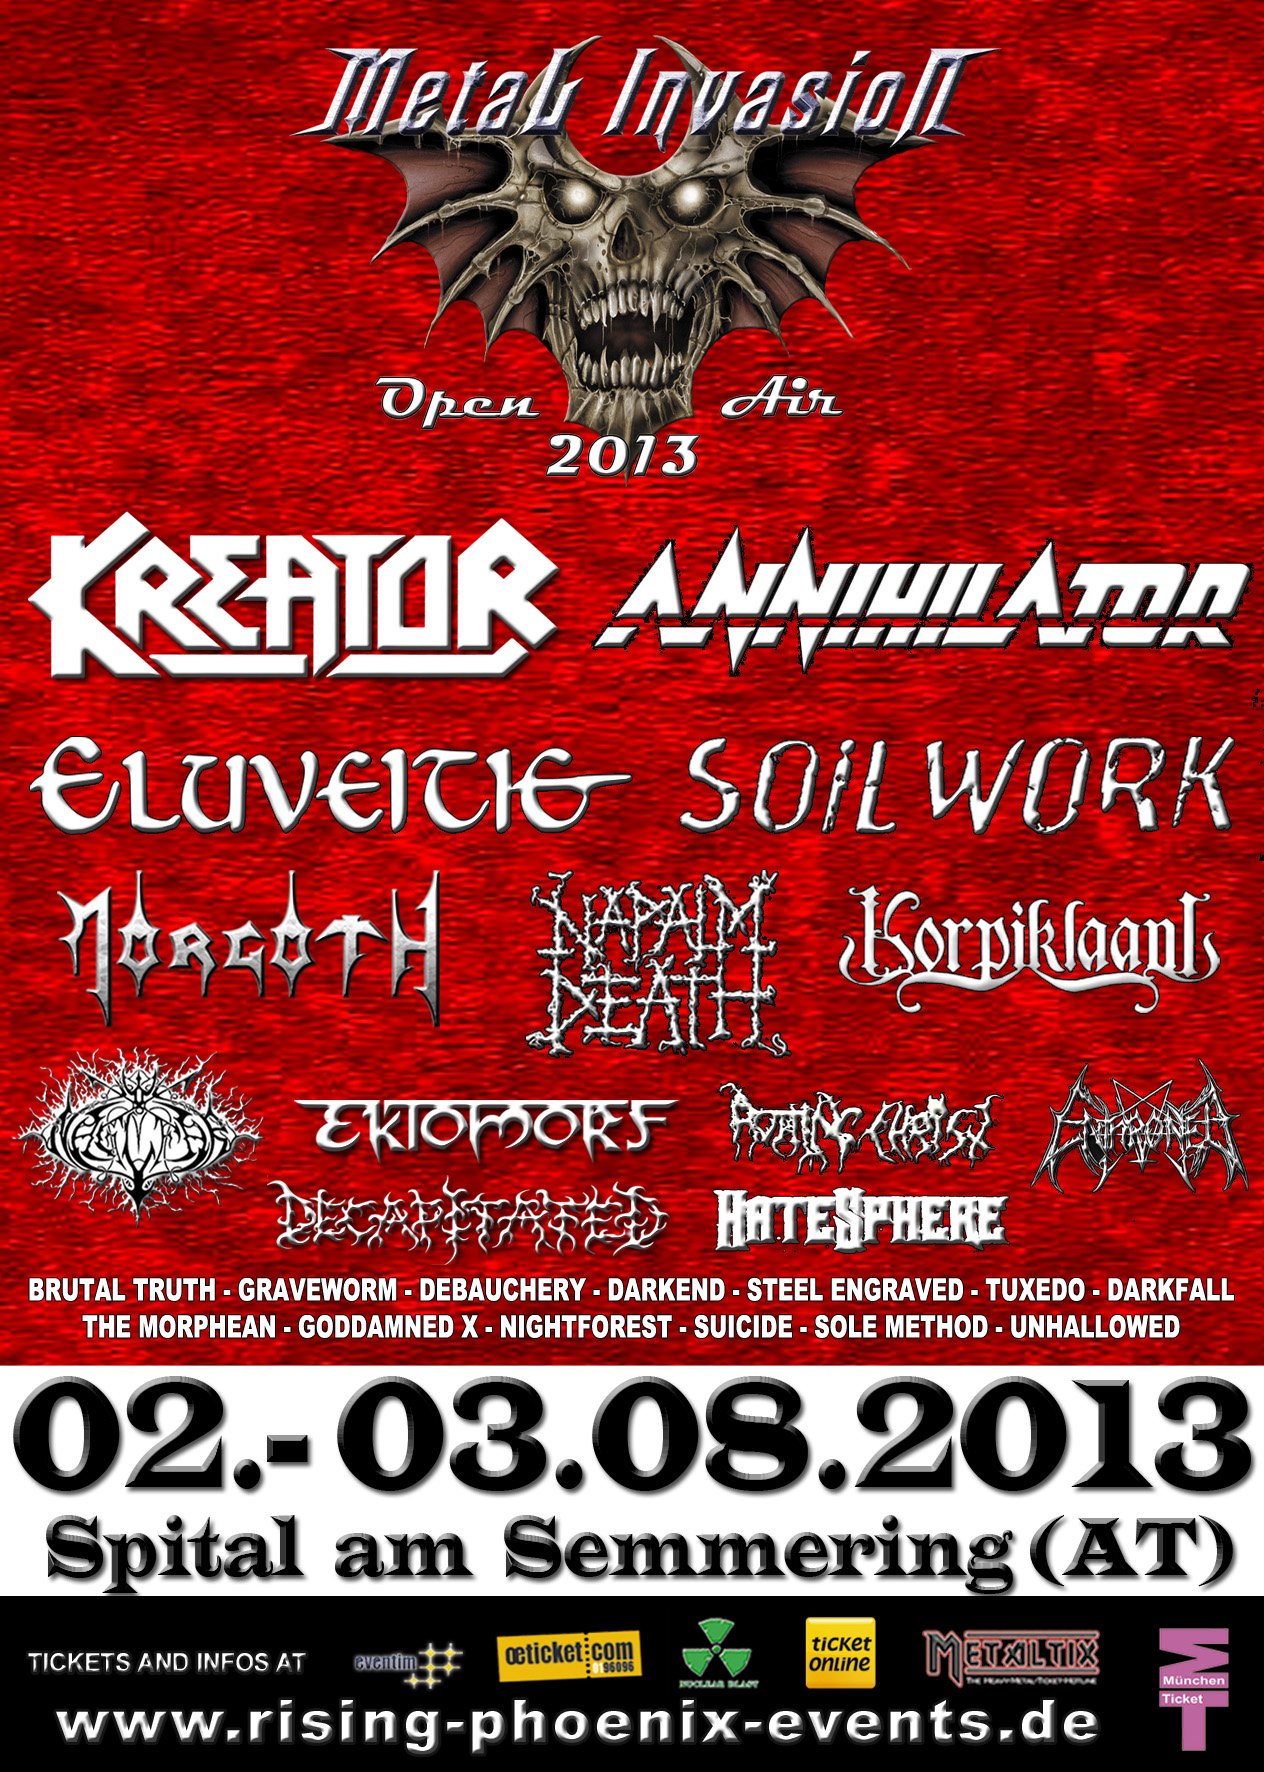 Metal Invasion Open Air 2013 at Kaltenbach (Spital am Semmering) on 2 Aug  2013 